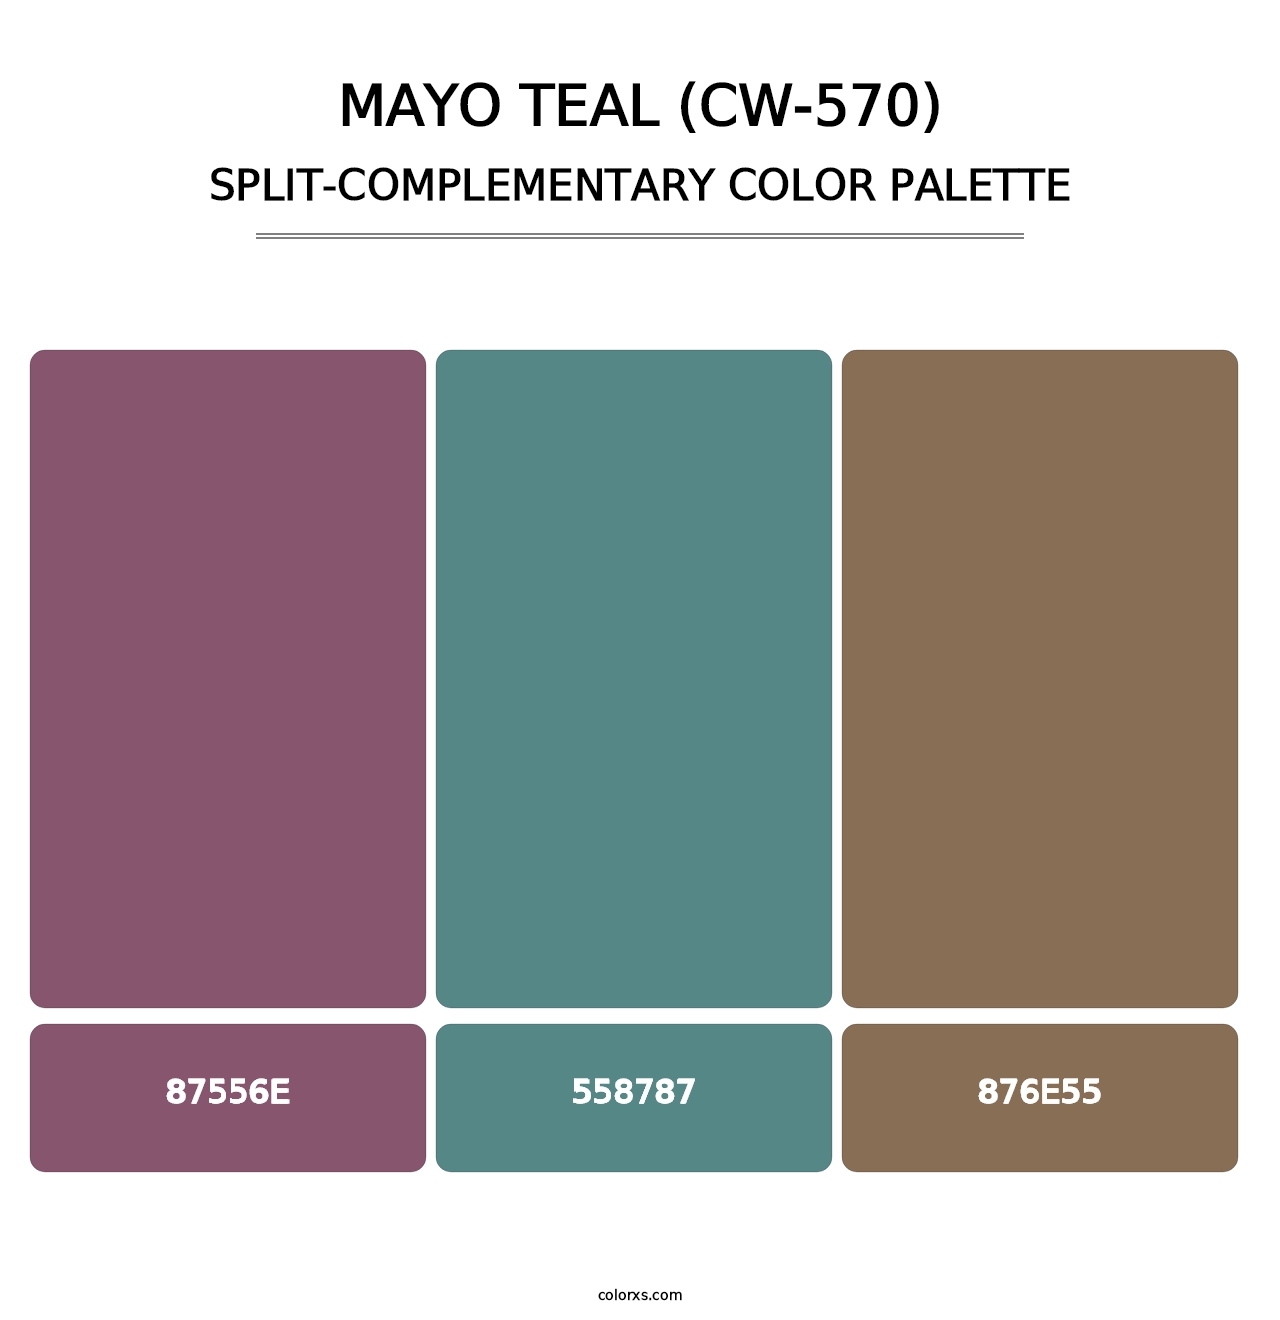 Mayo Teal (CW-570) - Split-Complementary Color Palette